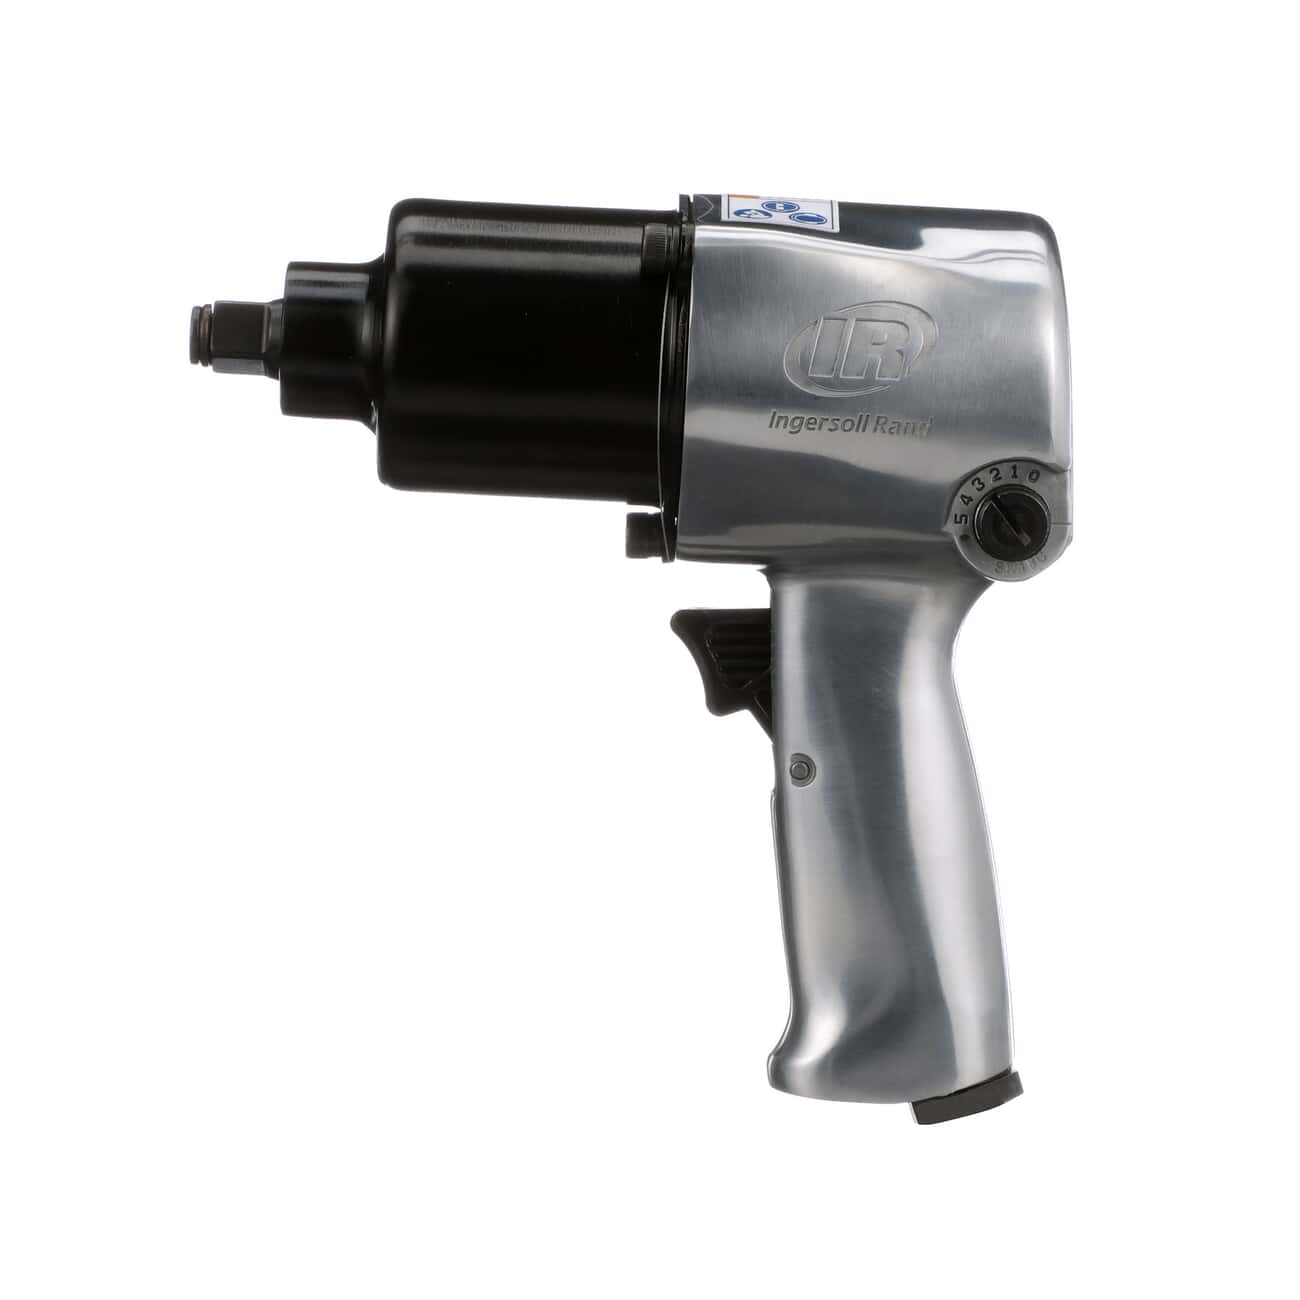 231C Impact Wrench | Ingersoll Rand Power Tools